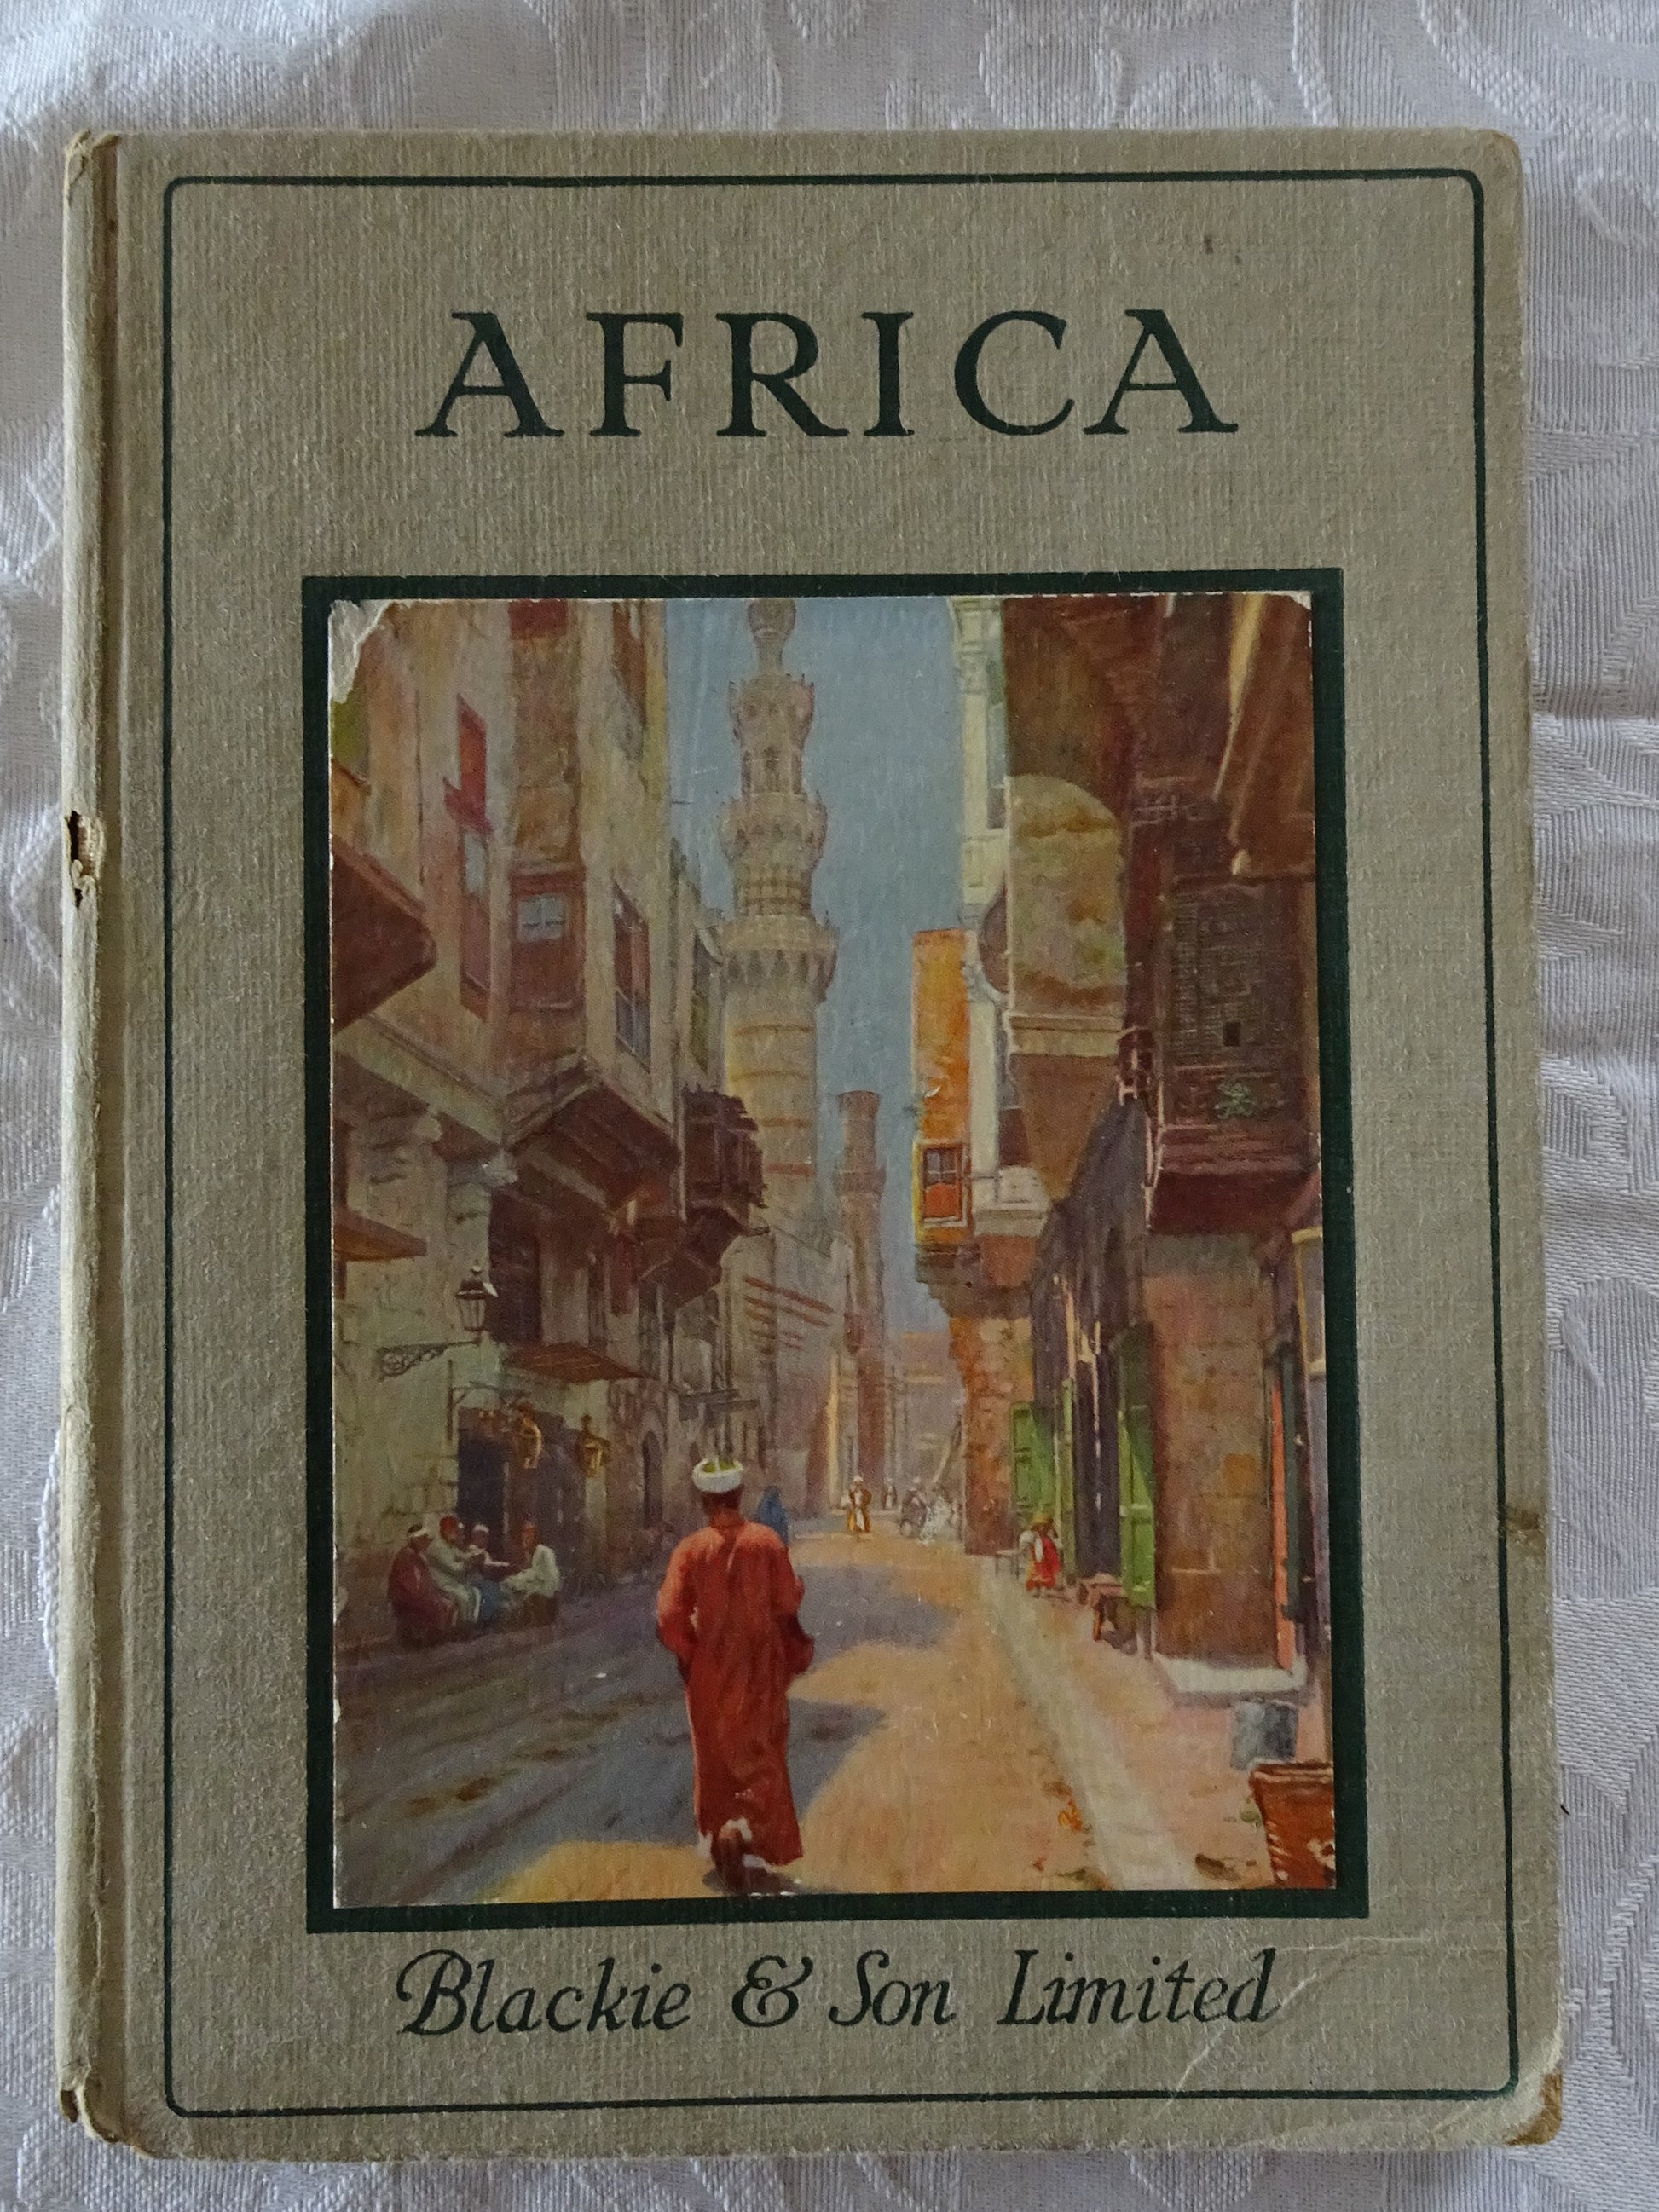 Africa  The Rambler Travel Books by Lewis Marsh